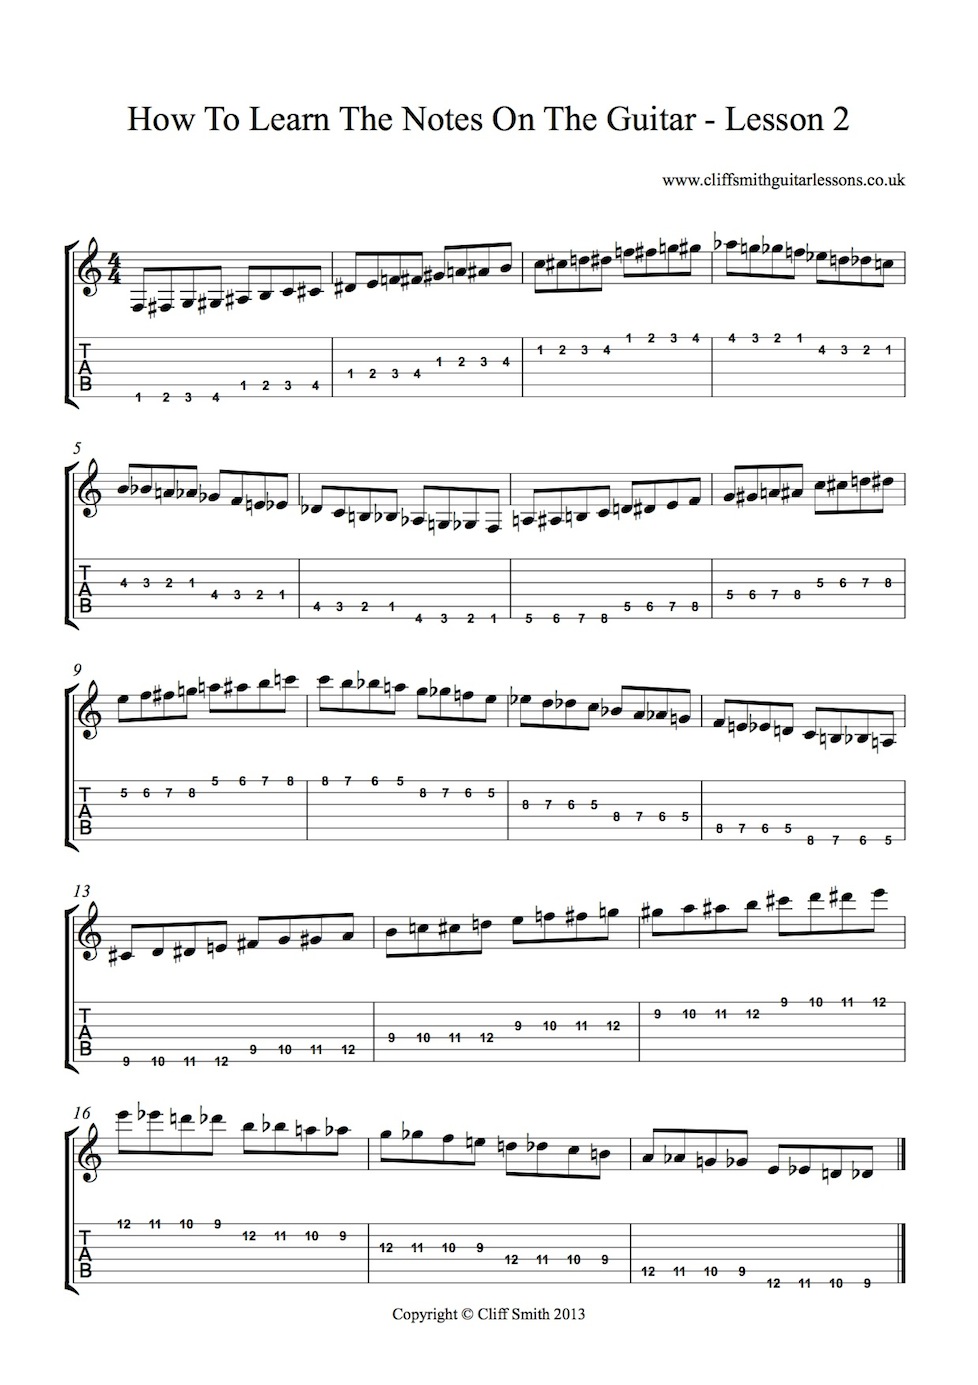 How to learn the notes on the guitar lesson 2 - Cliff Smith Guitar Lessons London